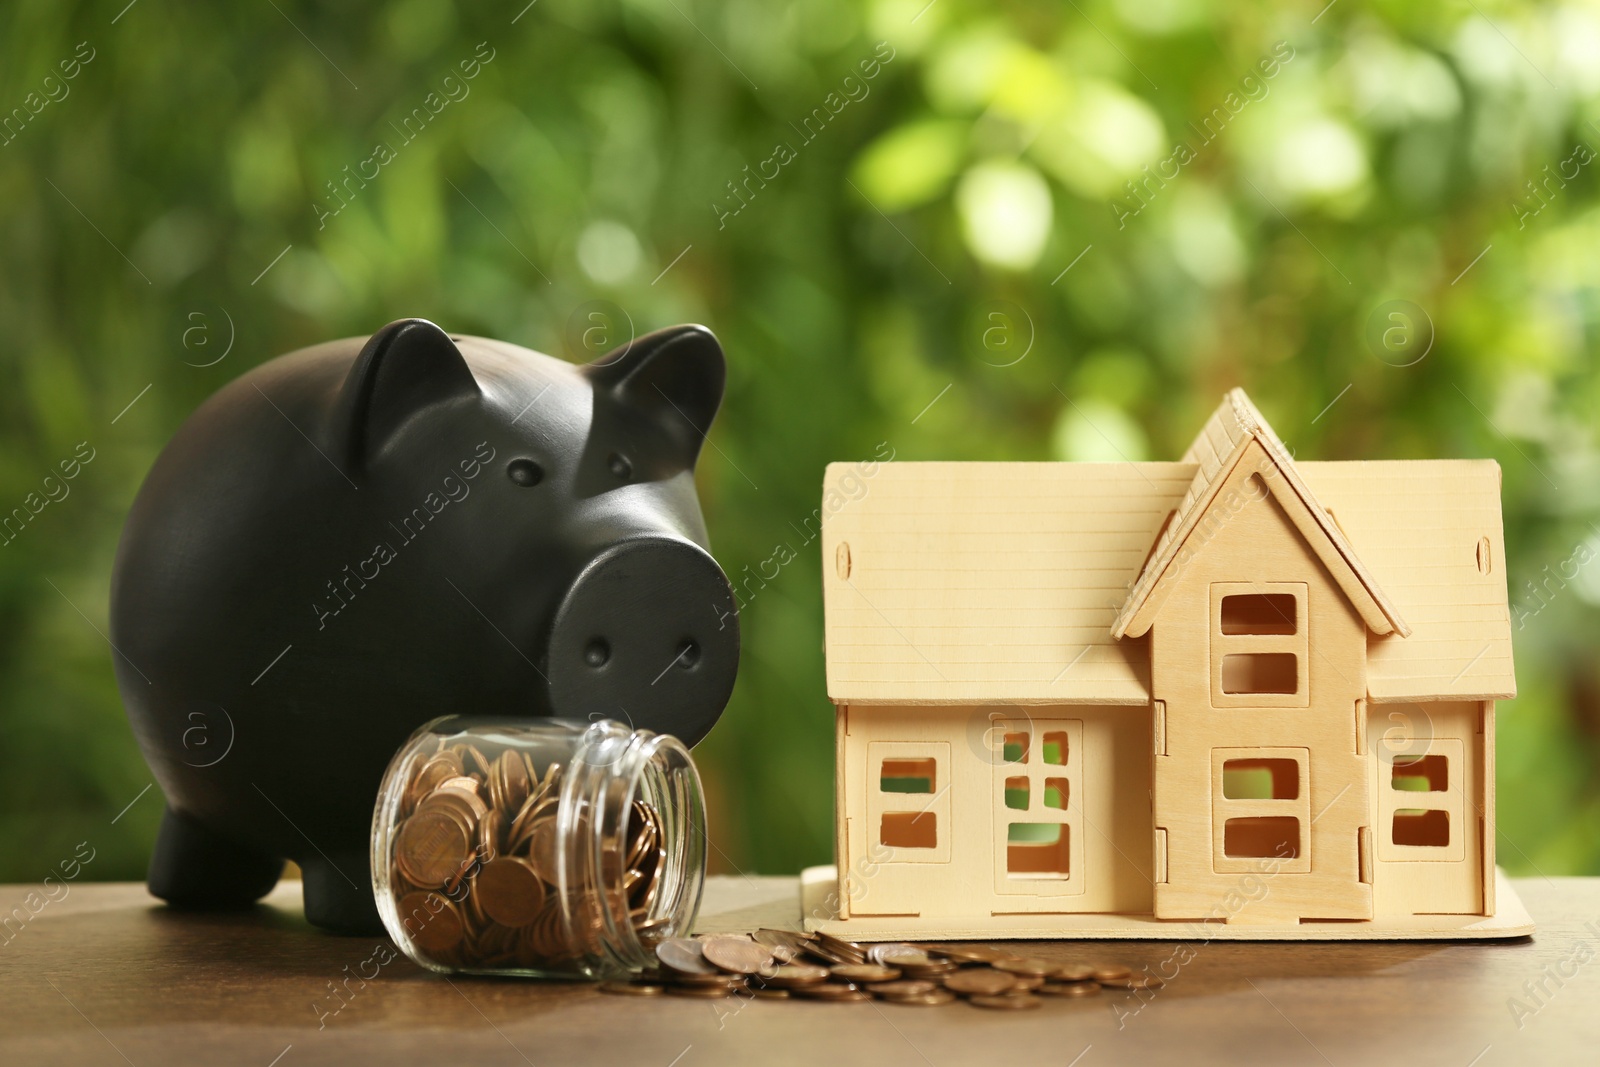 Photo of Piggy bank, house model and coins in glass jar on wooden table outdoors. Saving money concept